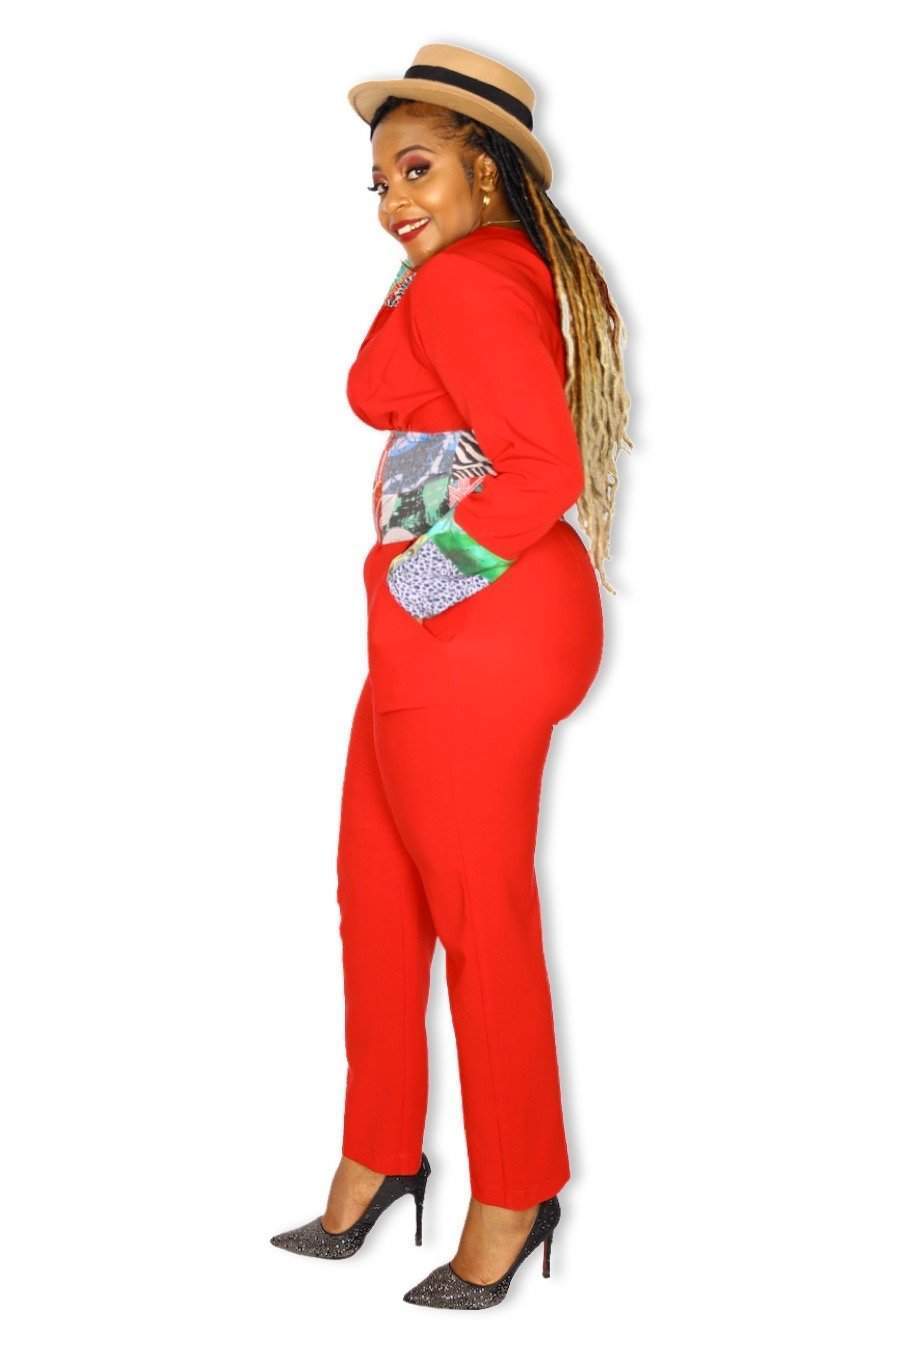 Red Jumpsuit for Women-danddclothing-AFRICAN WEAR FOR WOMEN,Jumpsuits,Women Jumpsuit